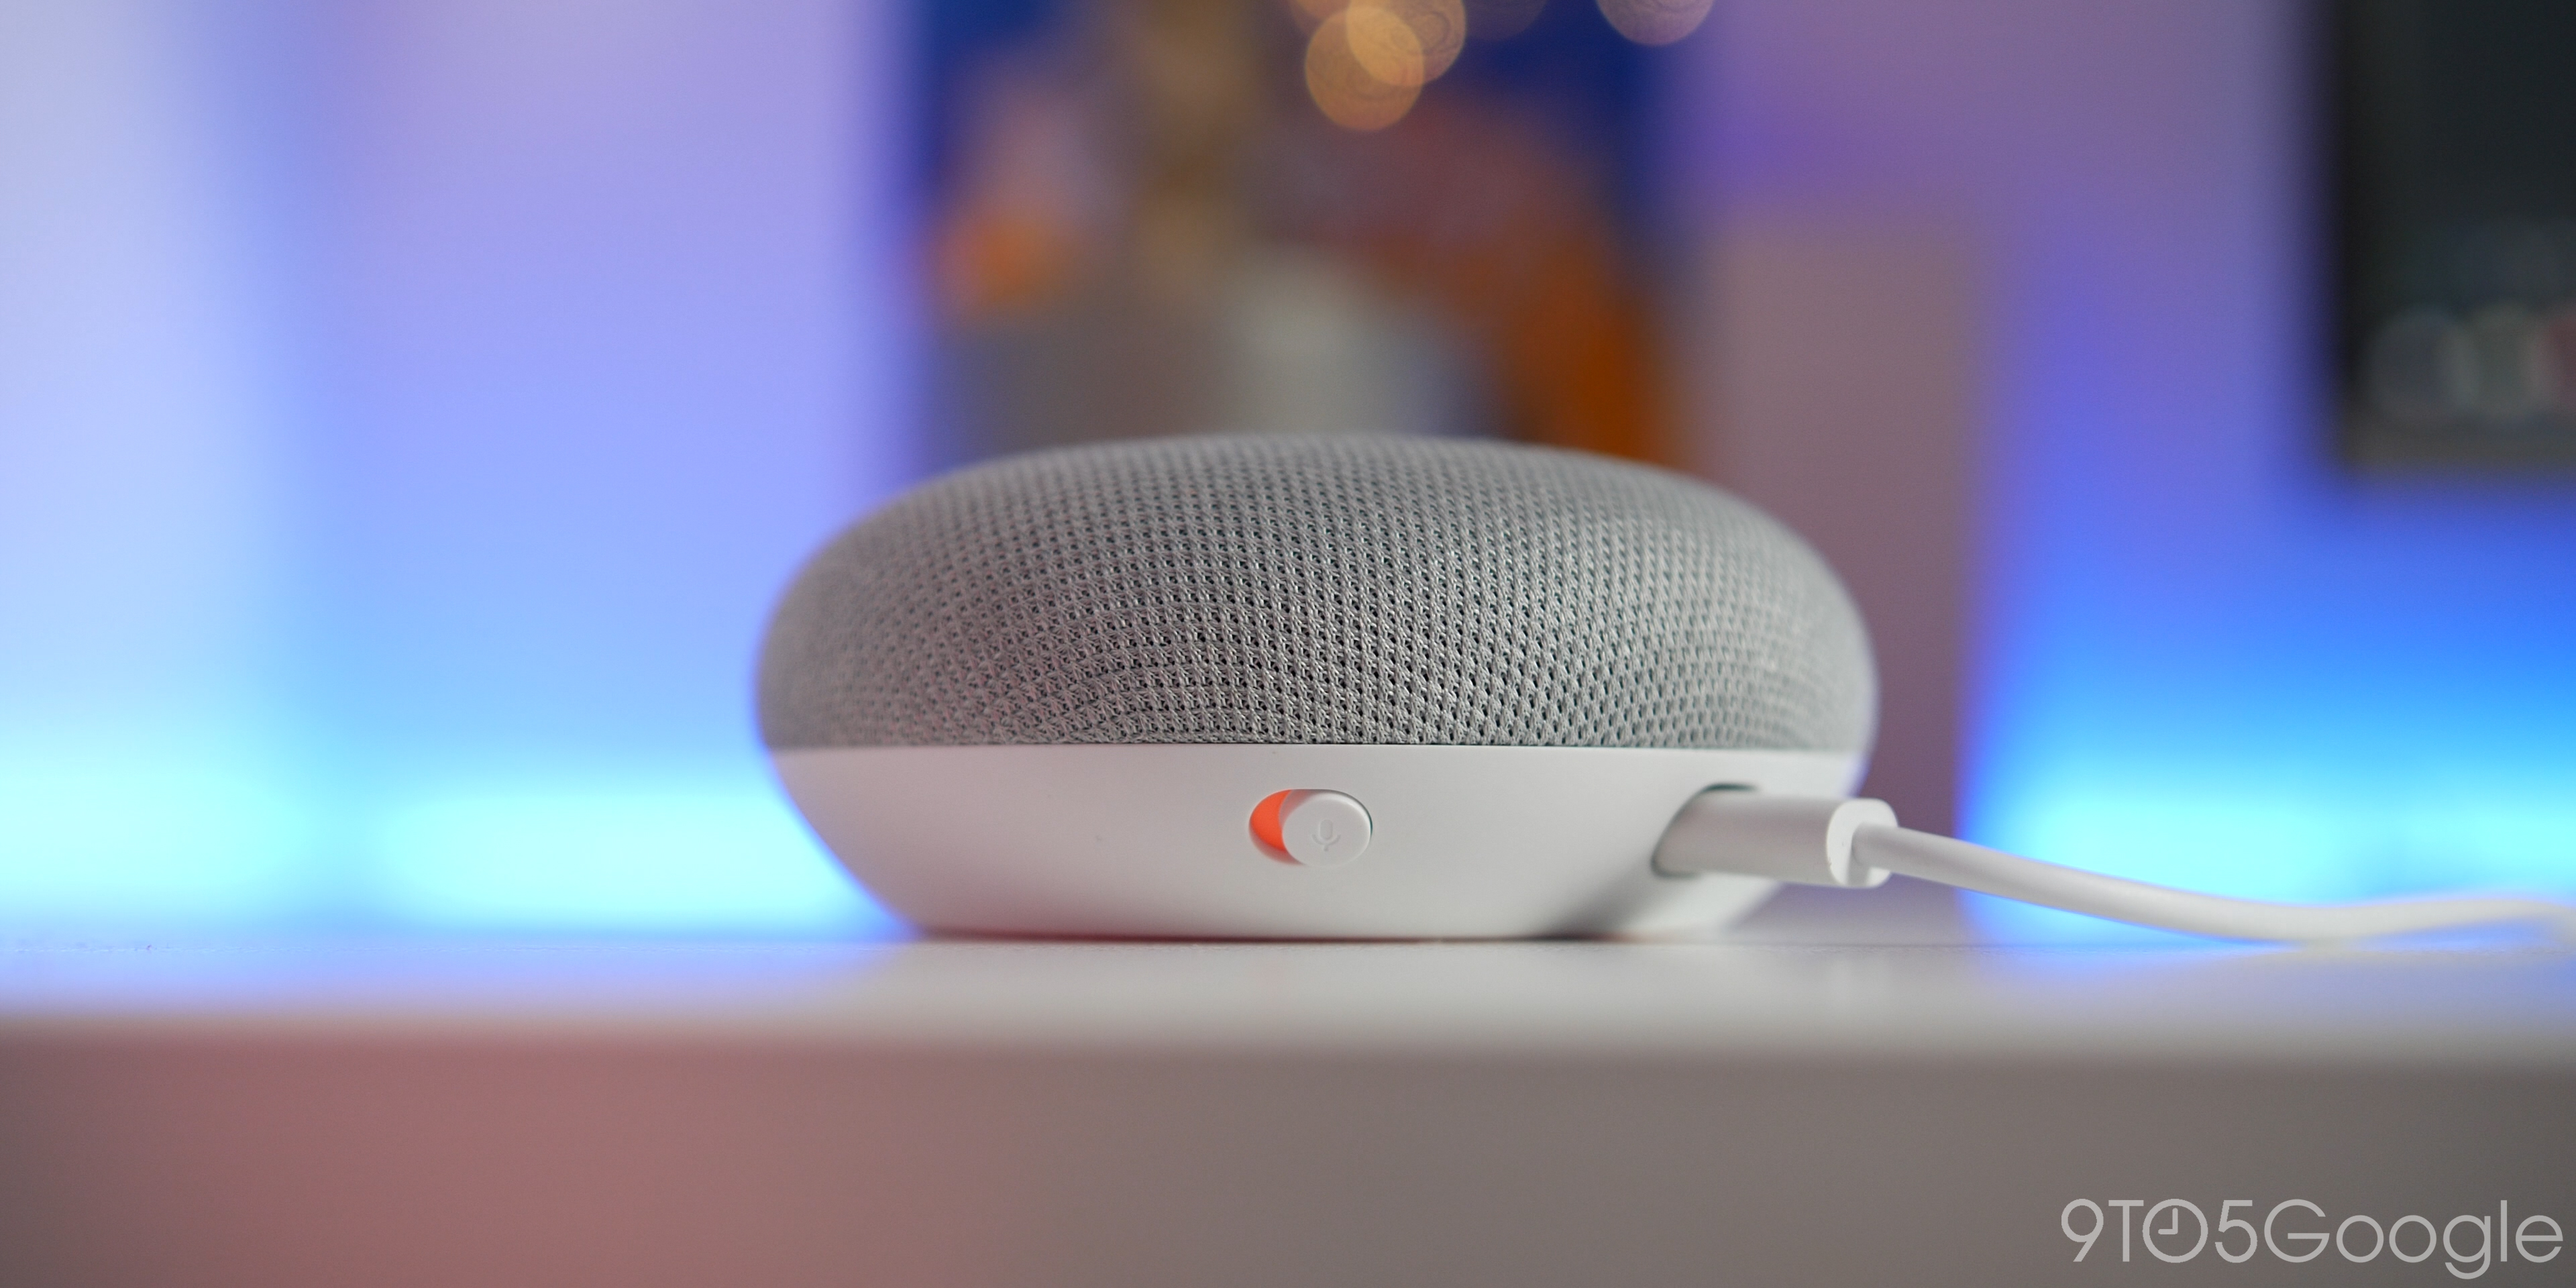 Google Home Mini is dead! And you shouldn't buy leftover stocks